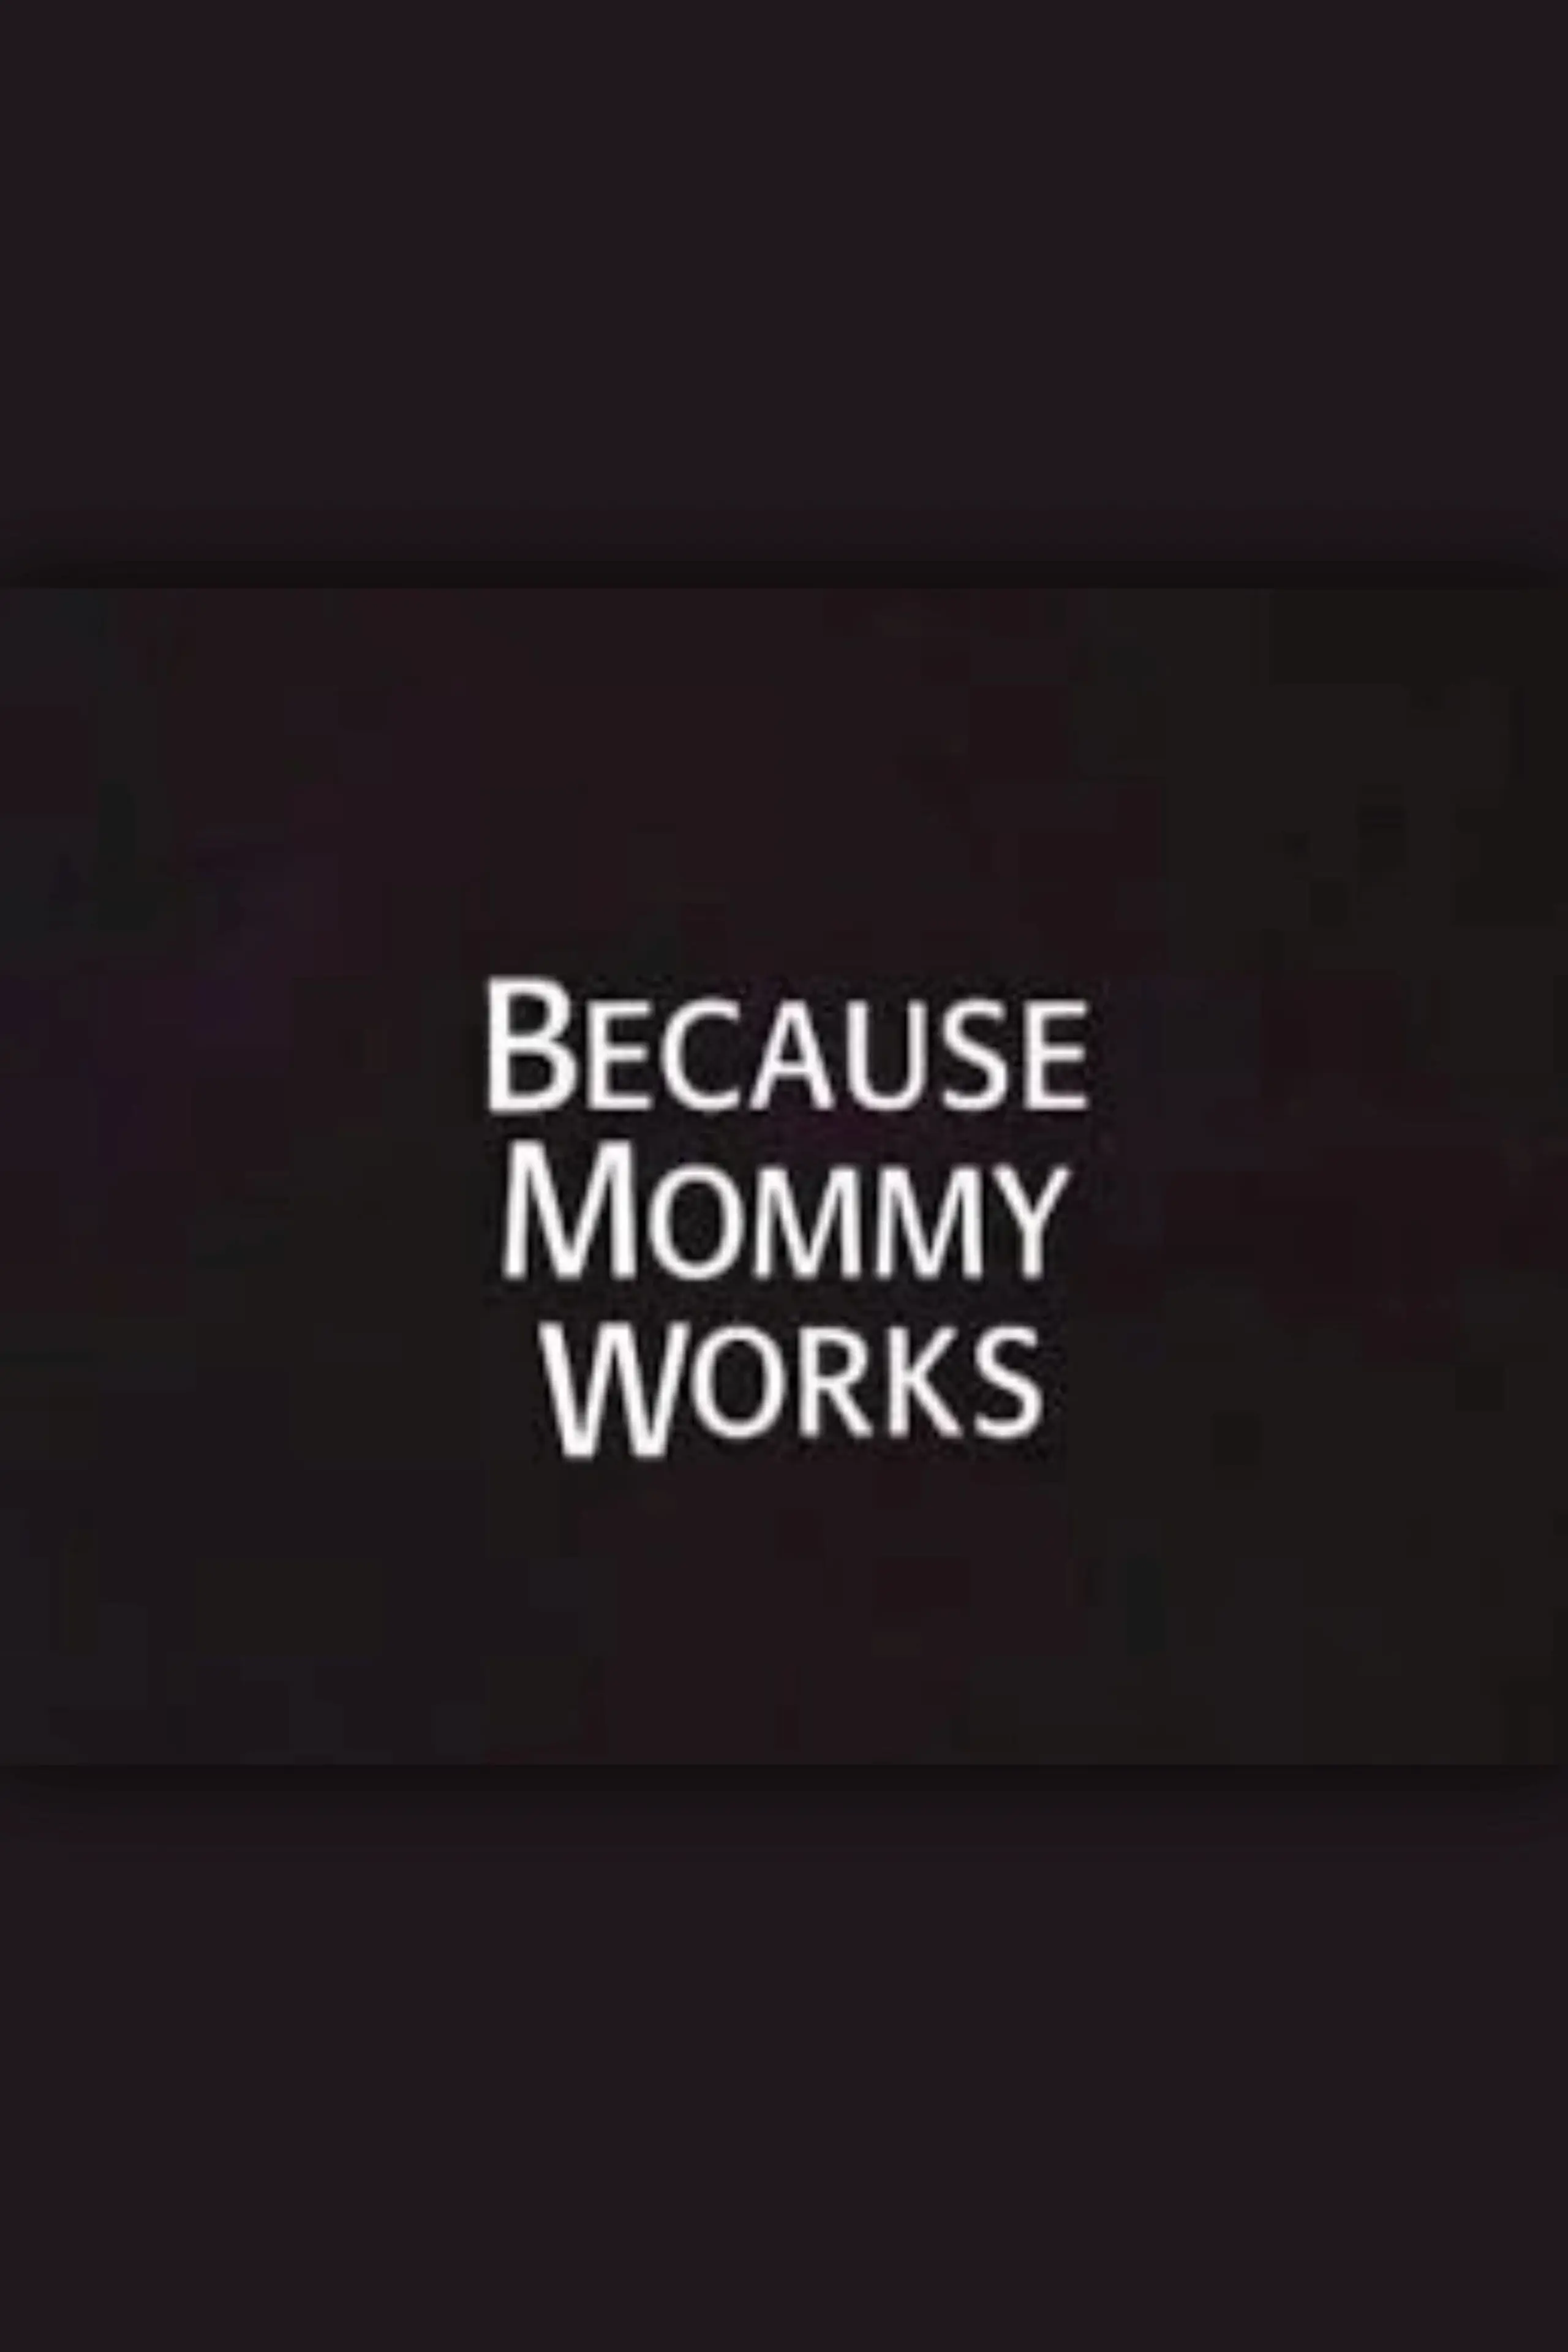 Because Mommy Works